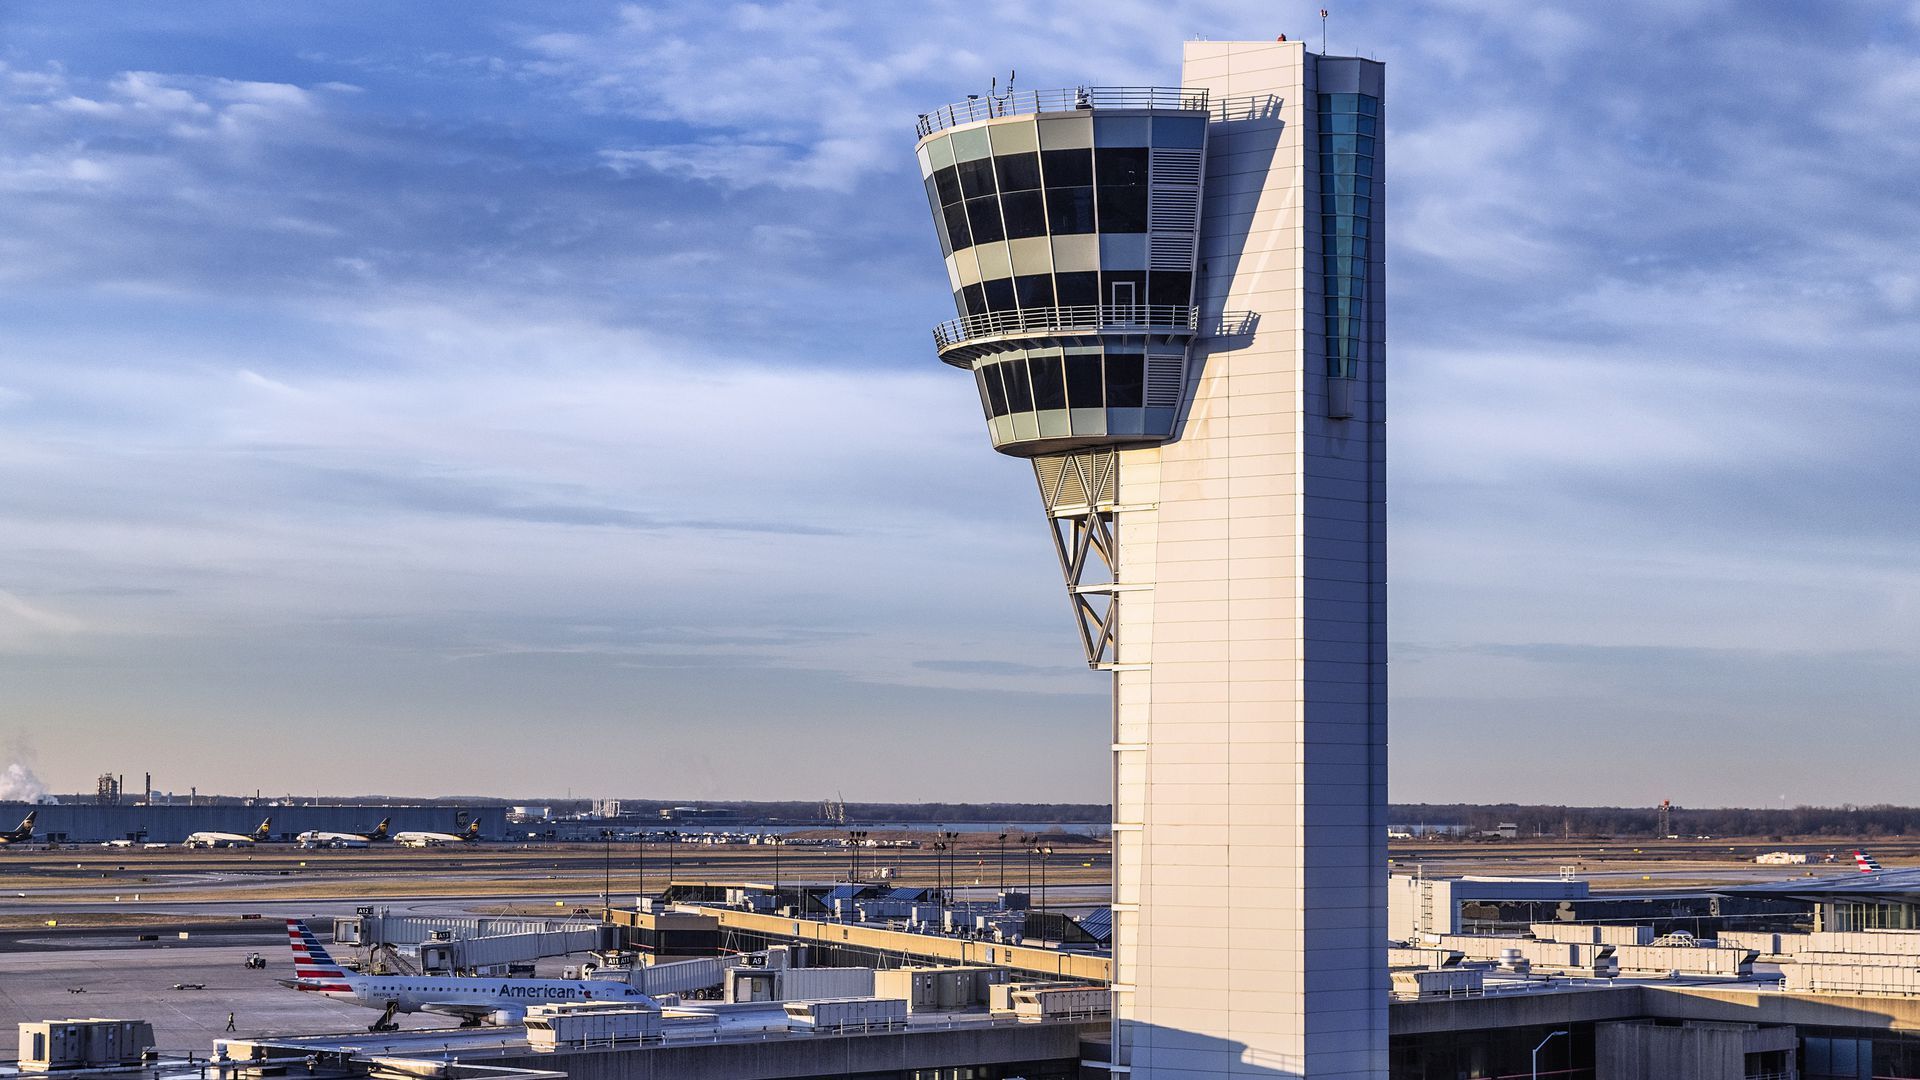 The air traffic control tower at Philadelphia Airport.